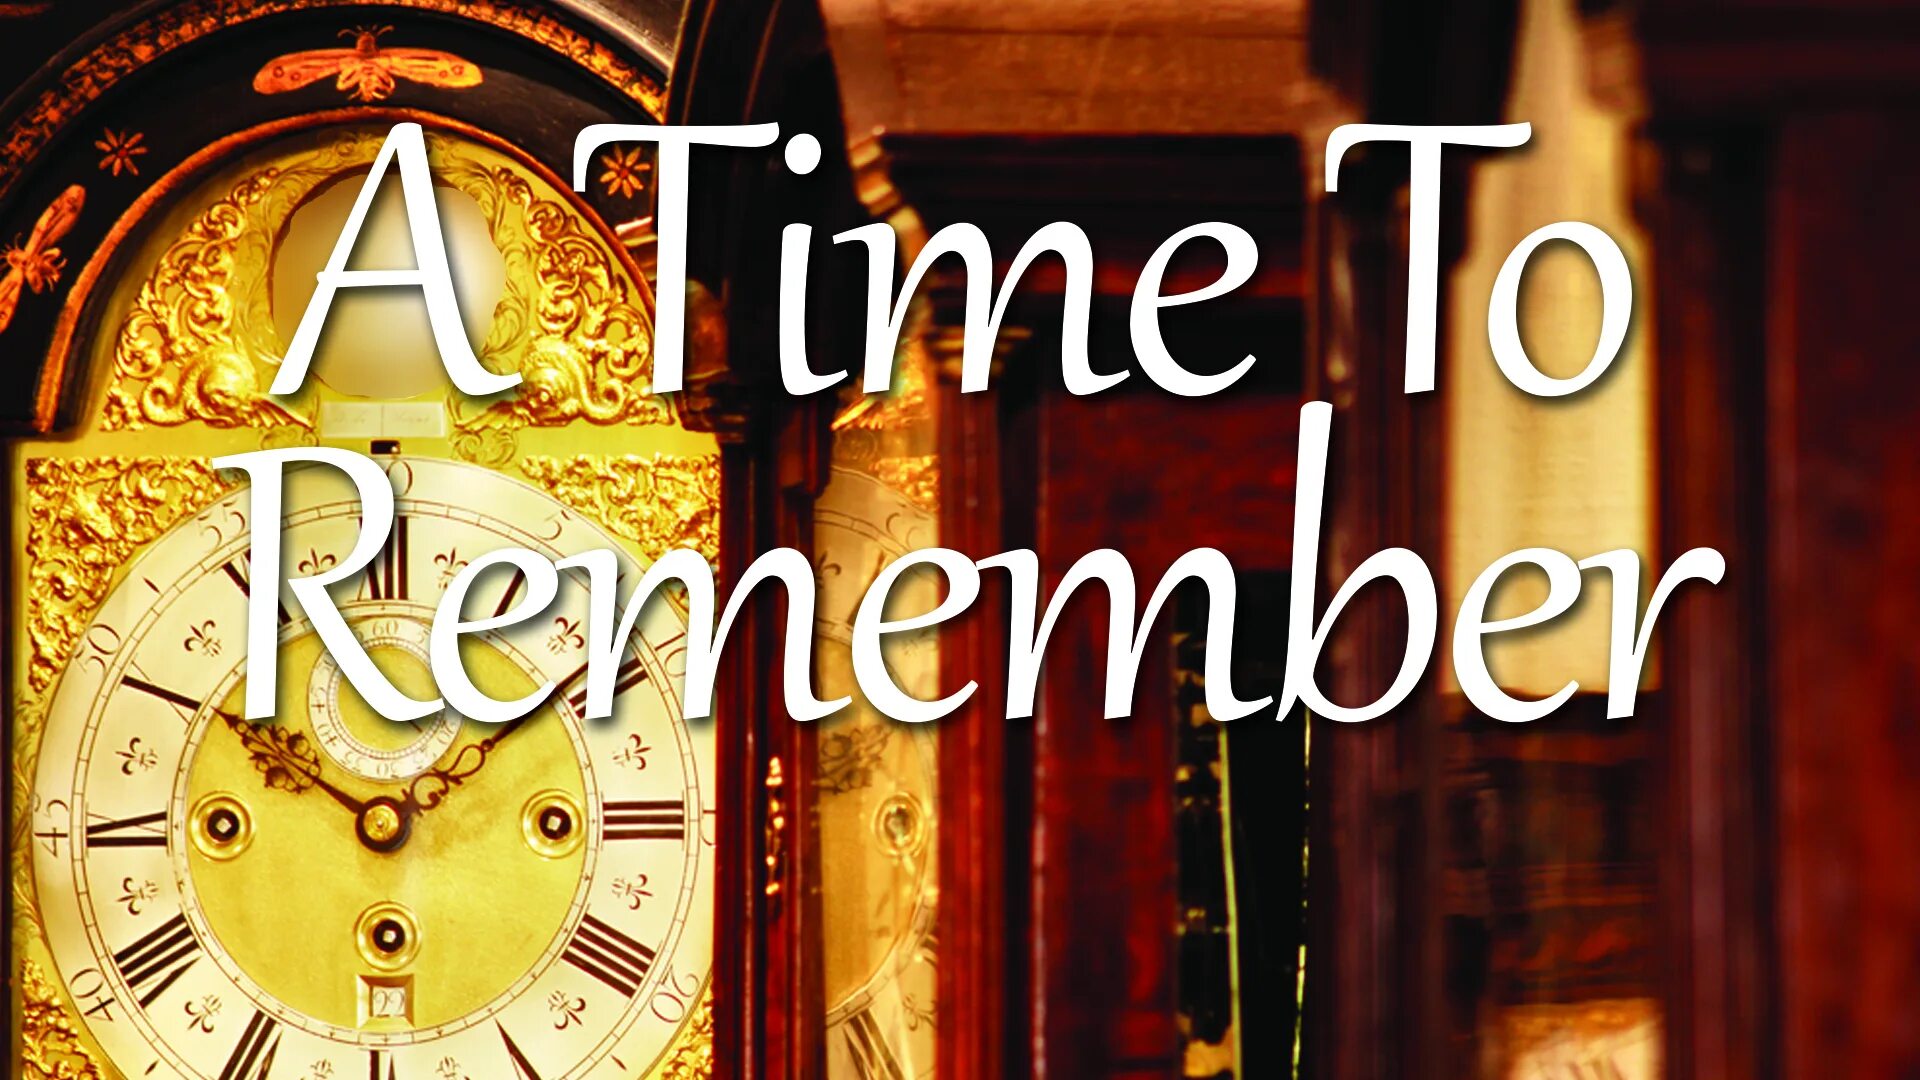 A time to remember. It is time to remember. Time to Loveposter. A year to remember